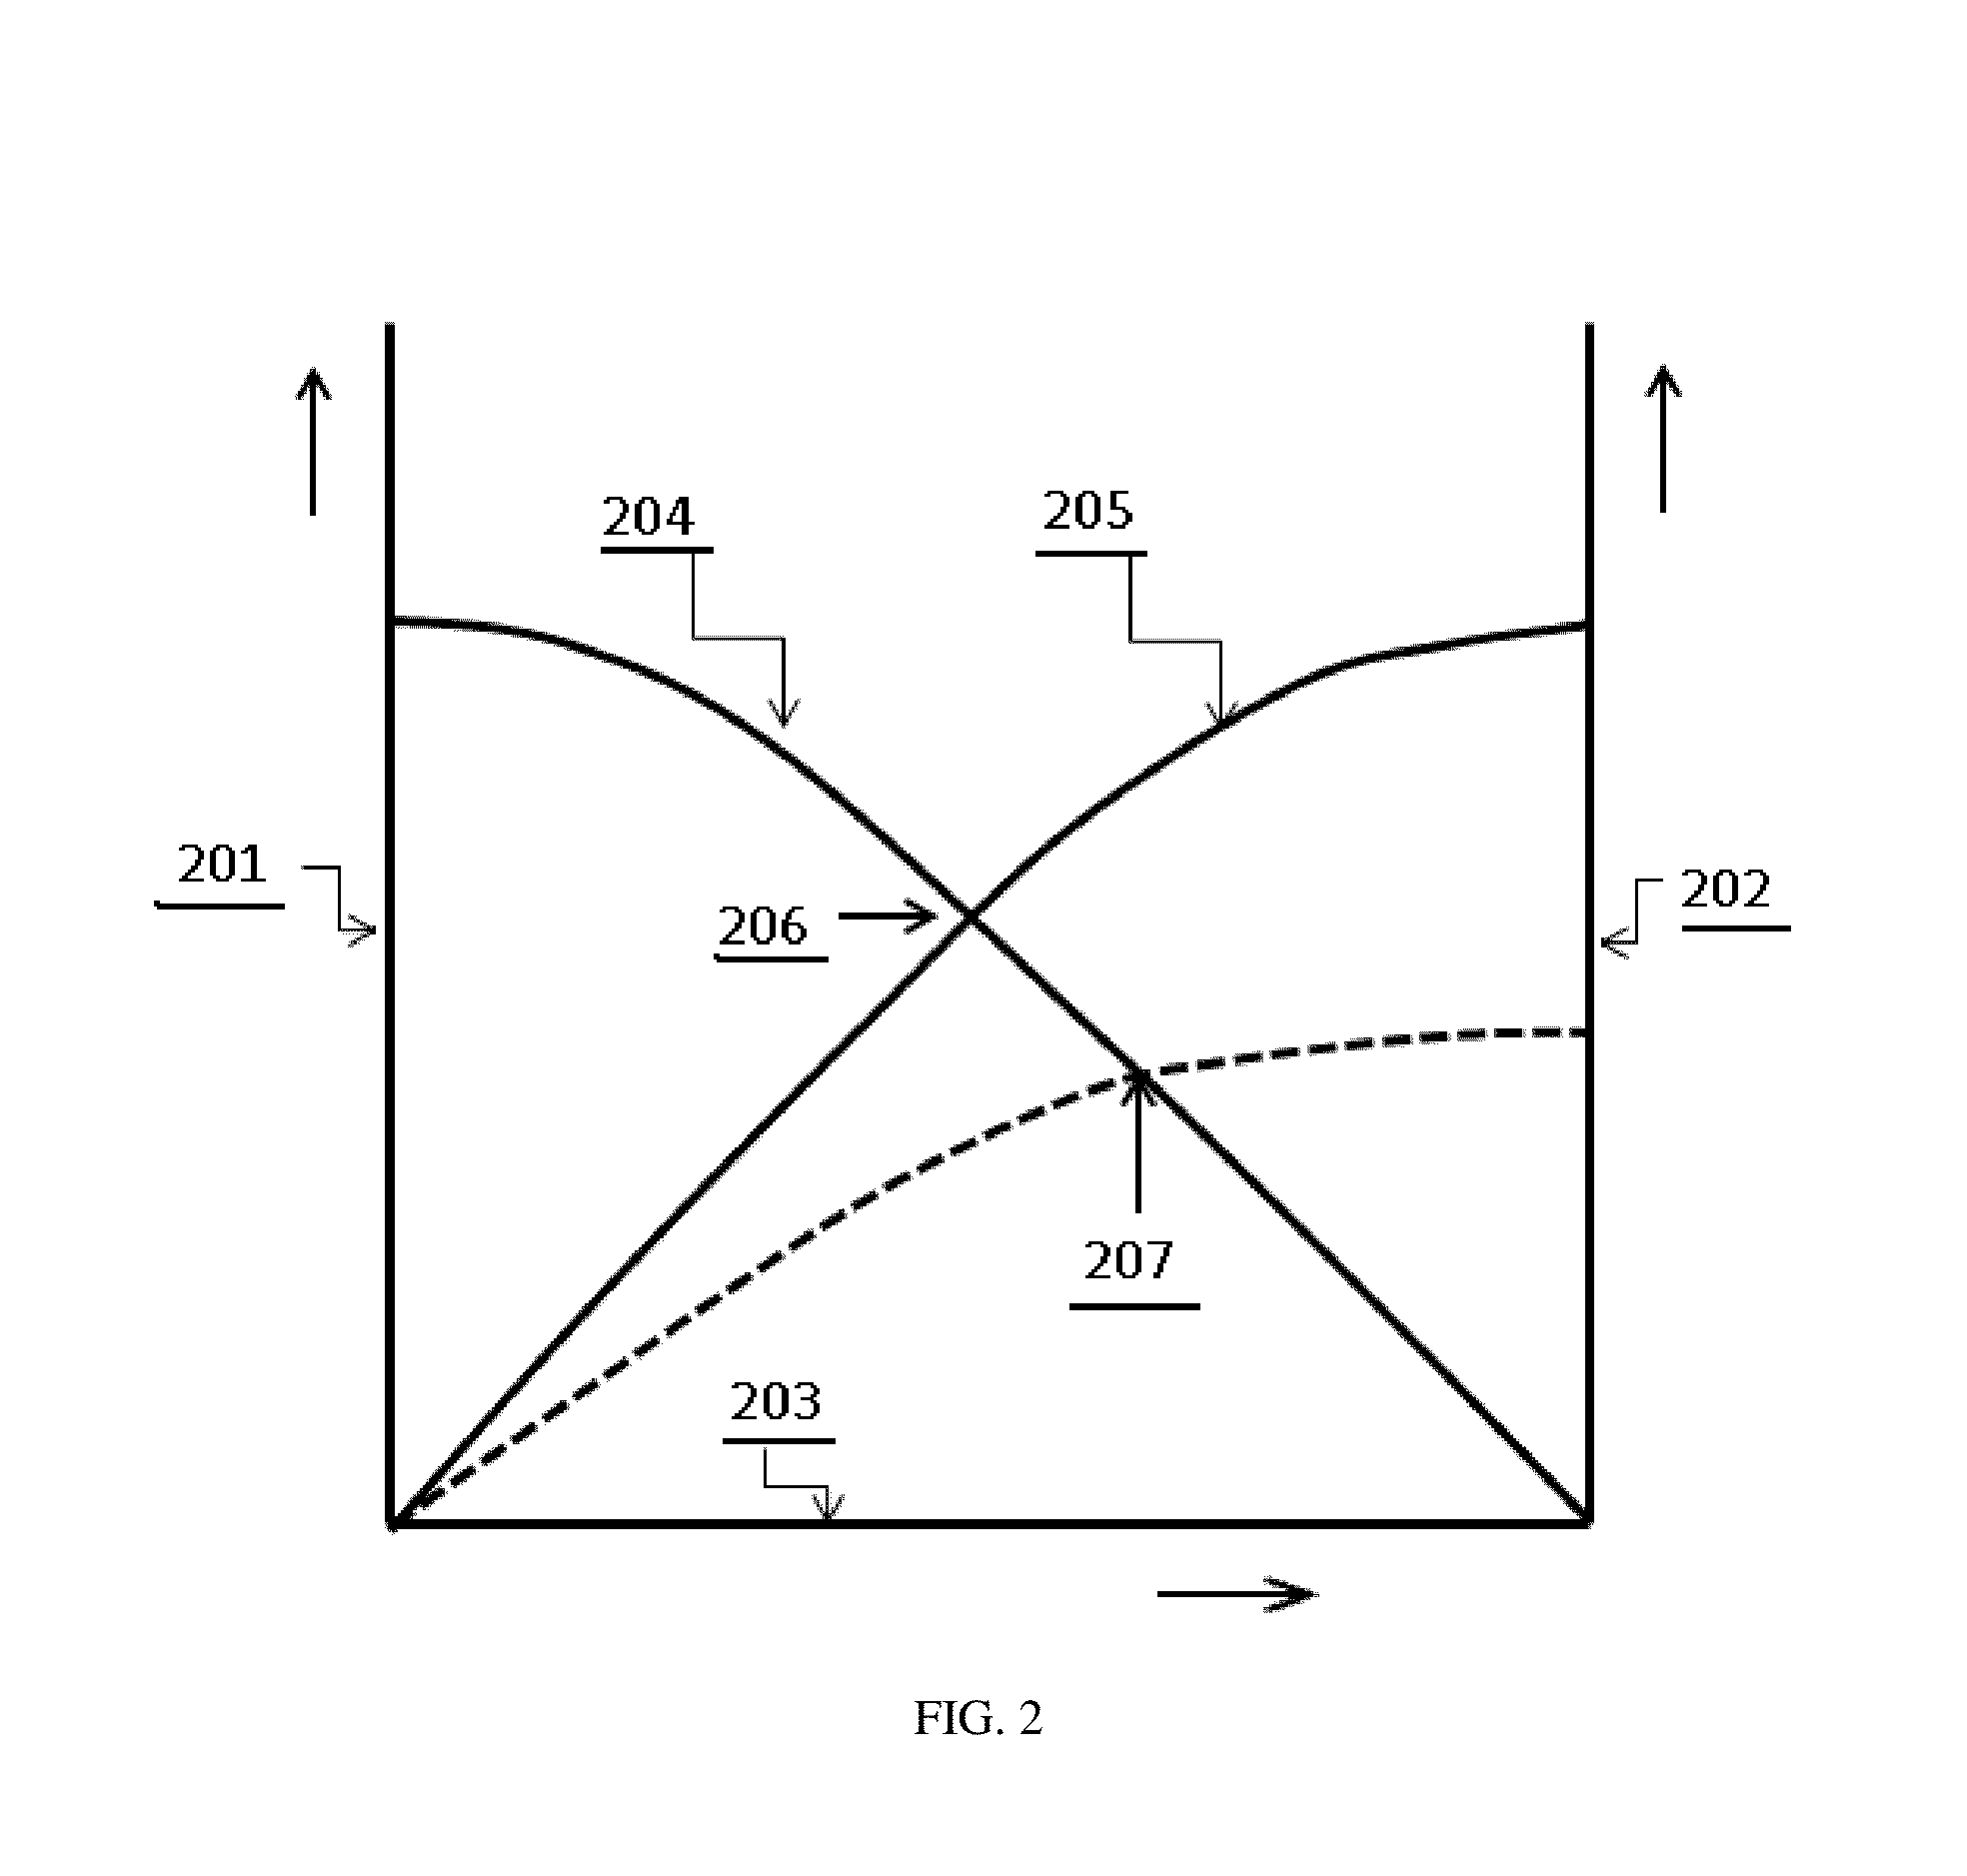 Method and Device to Manage Fluid Volumes in the Body